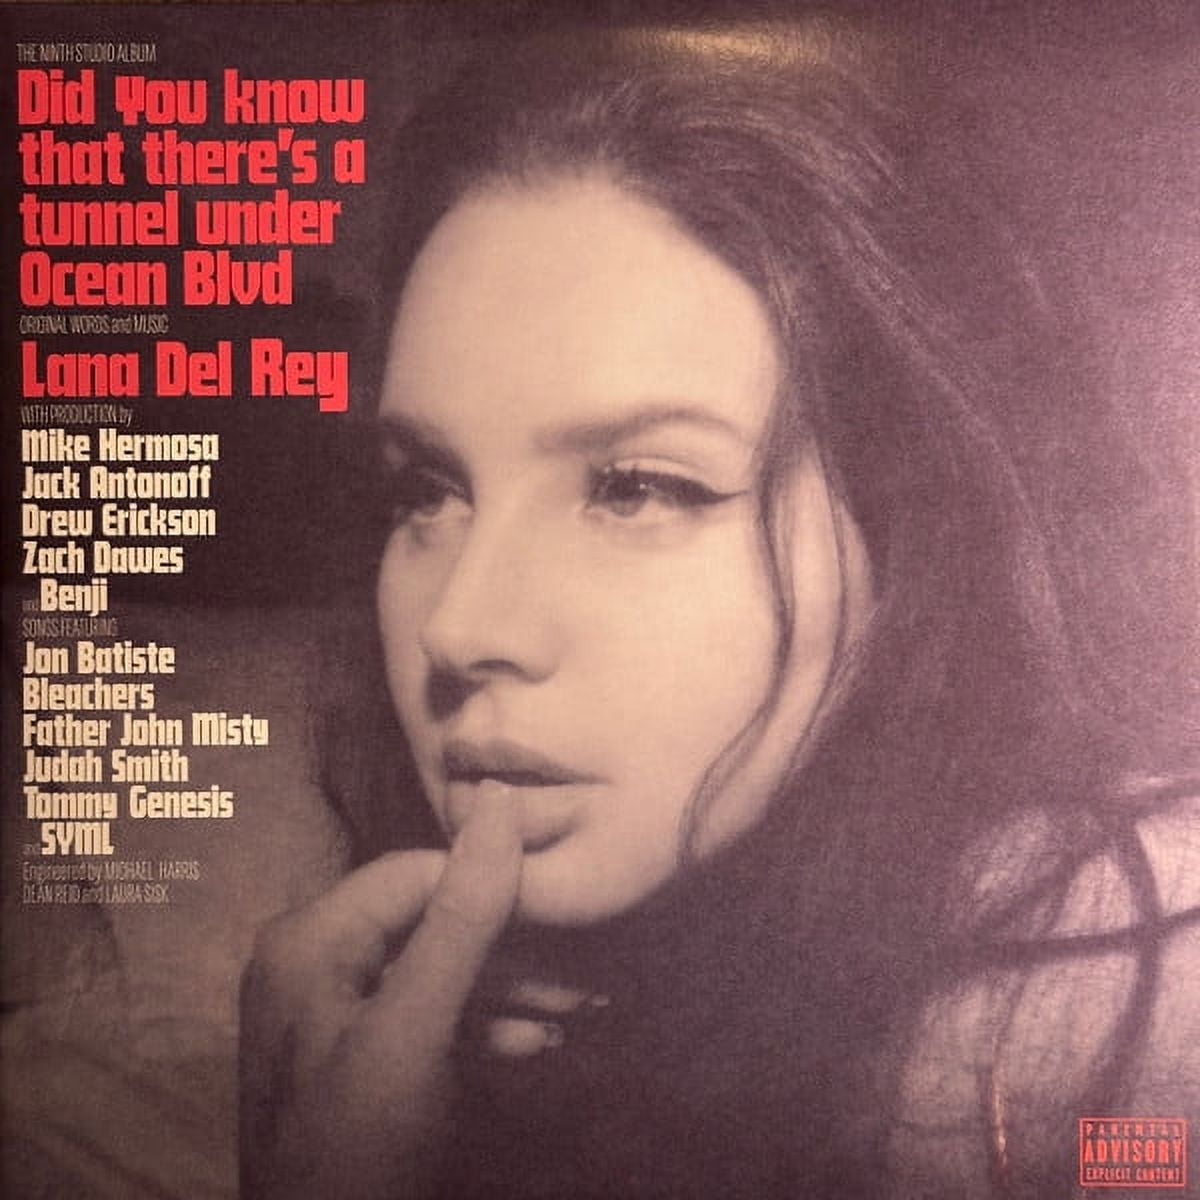 Lana Del Rey - Did you know that there’s a tunnel under Ocean Blvd - CD